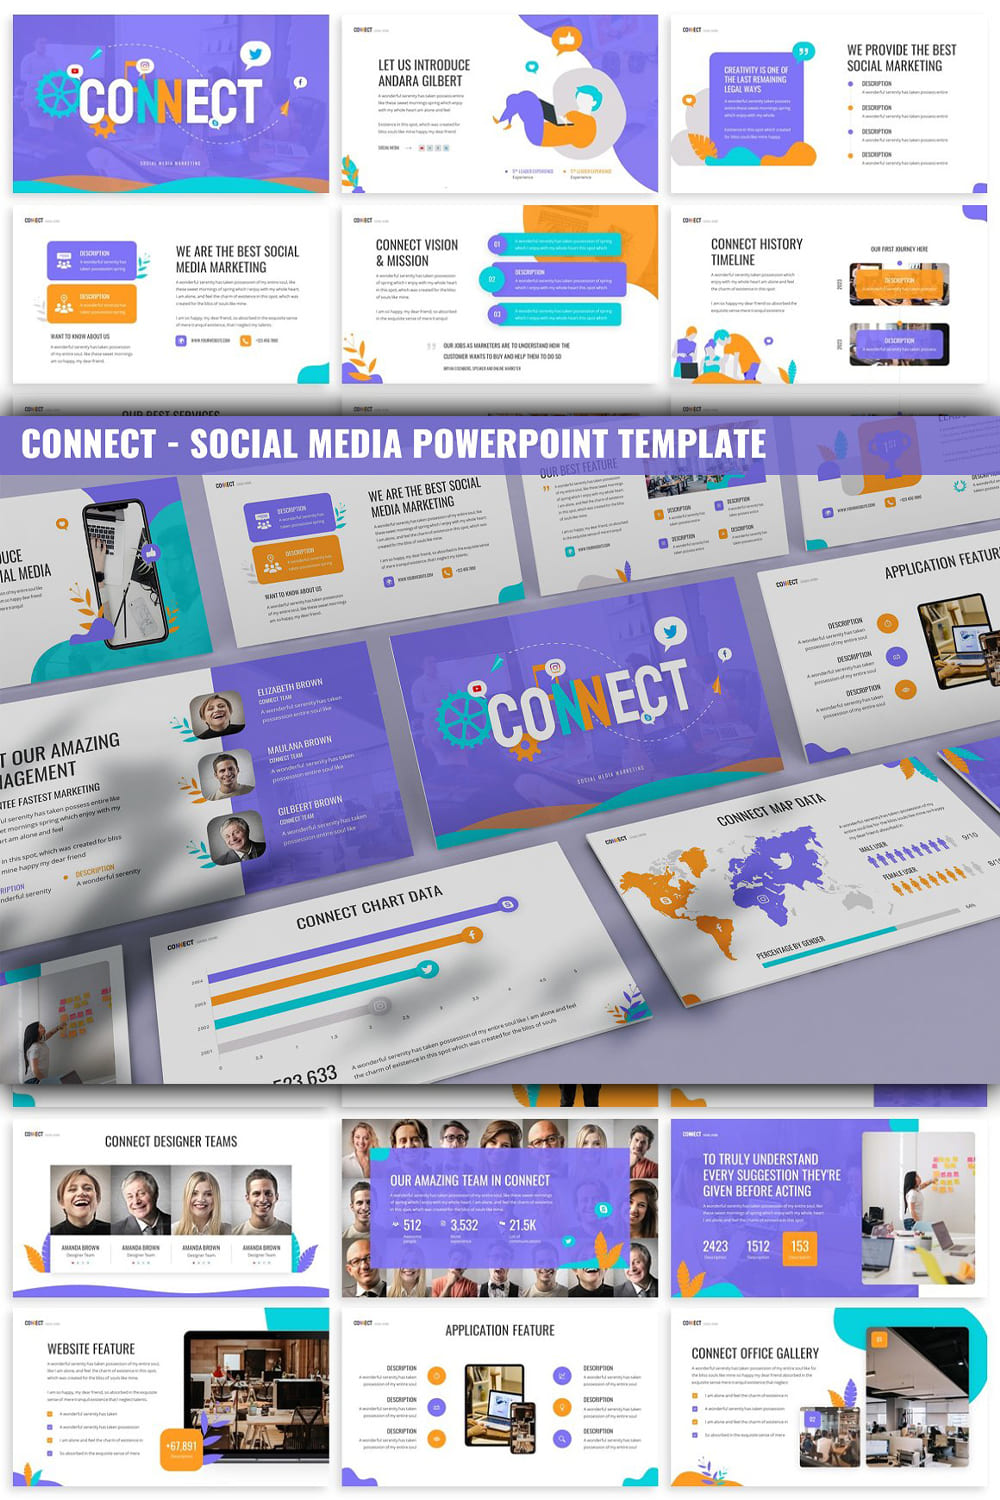 Connect - Social Media PowerPoint pinterest image.